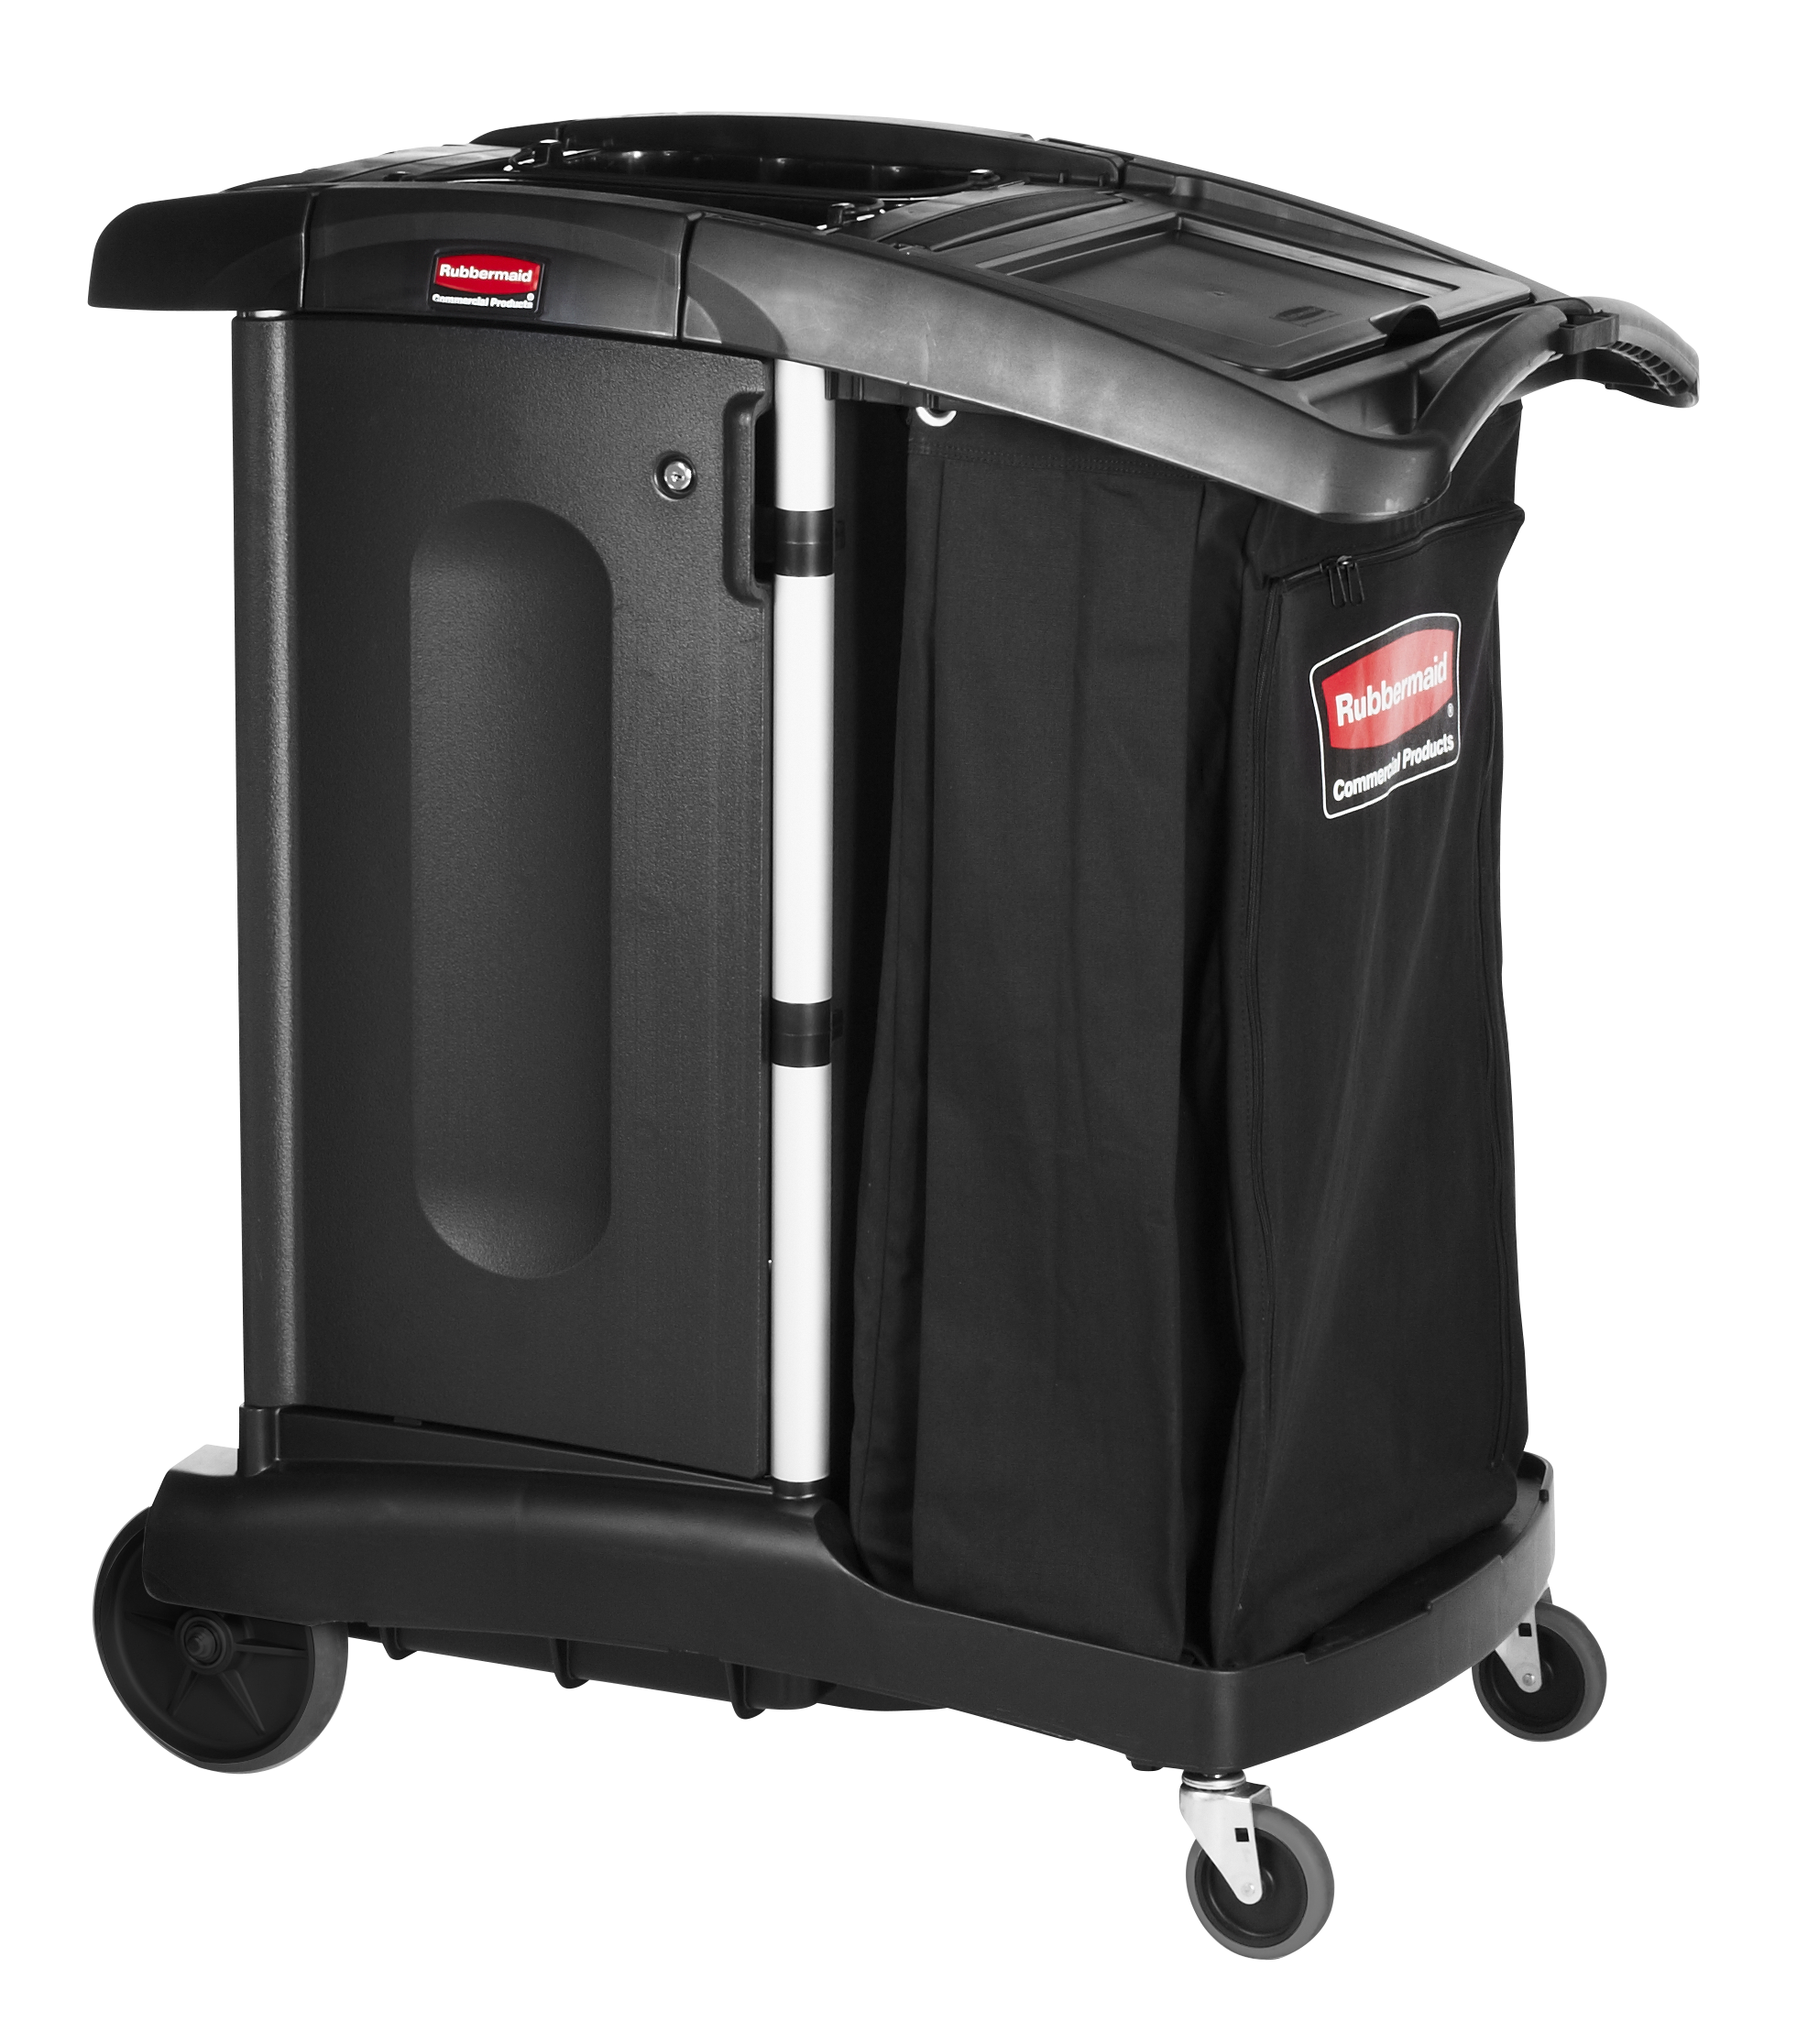 Rubbermaid Commercial Products Executive Series Compact Housekeeping Cart,  Small, Black, Other Housekeeping Carts, Housekeeping Carts, Housekeeping, Housekeeping and Janitorial, Open Catalog